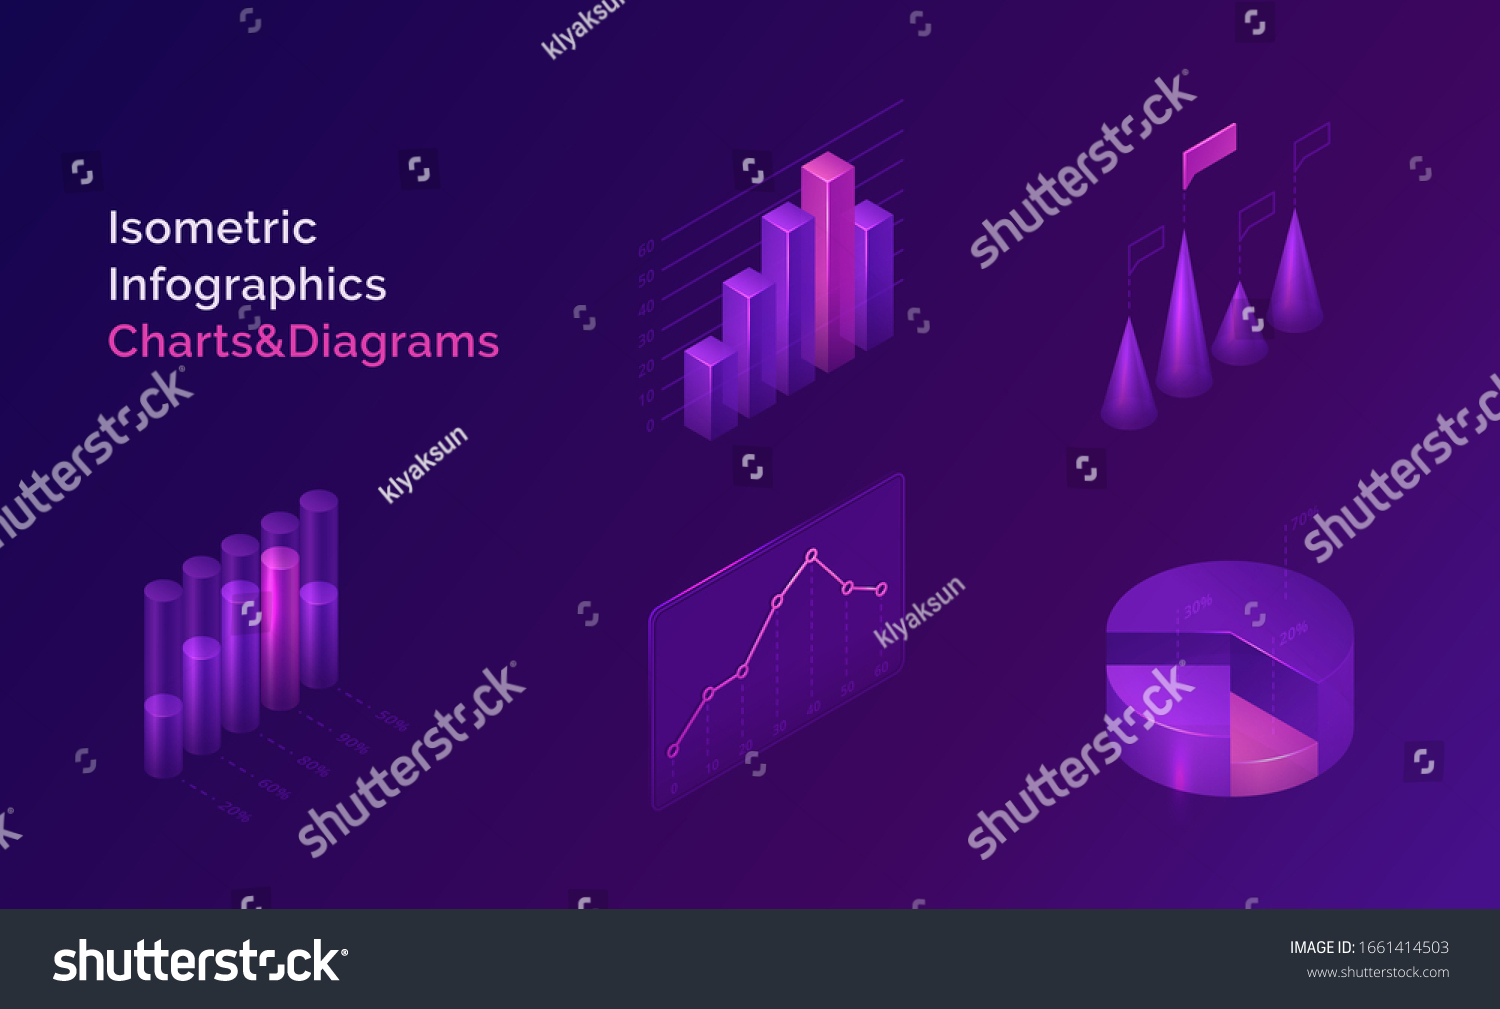 SVG of Isometric infographics charts and diagrams, 3d data analysis columns, infographic vector elements, financial information datum statistic. Template for business presentation, report or web site design svg